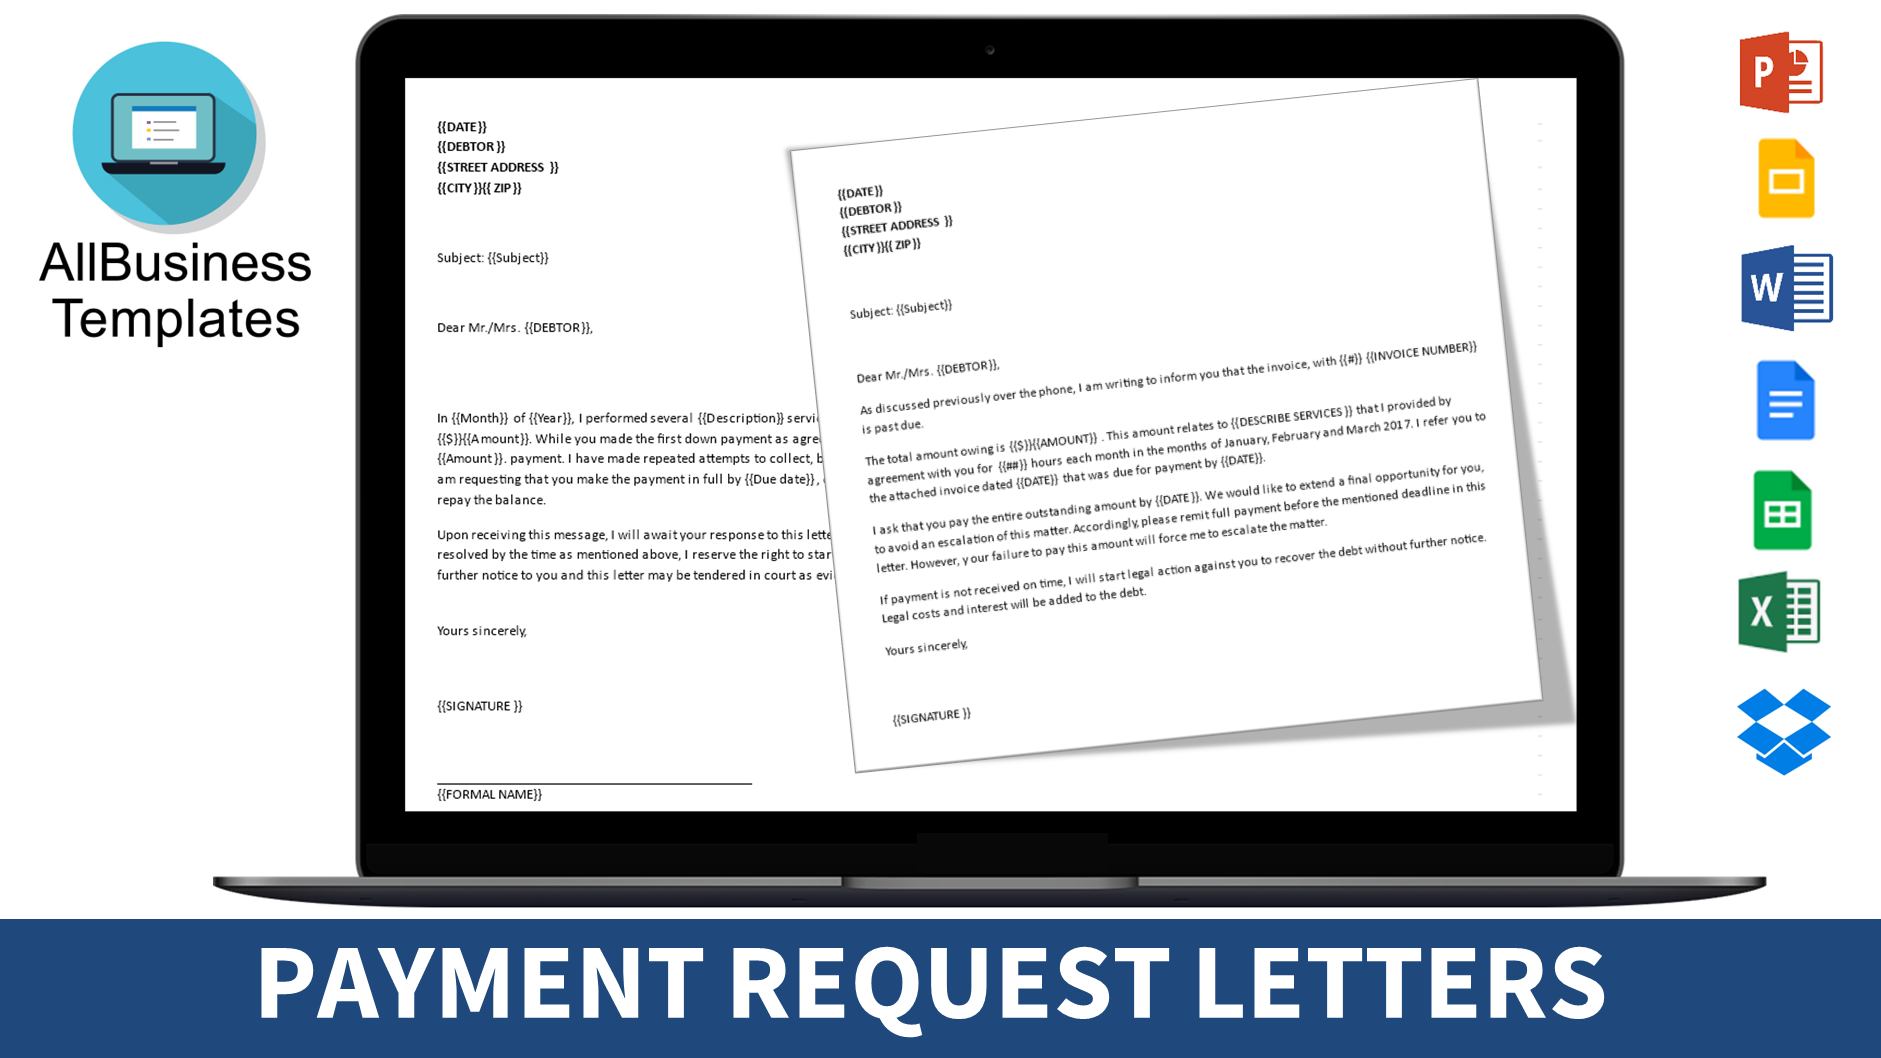 Request letter for cash payment instead of cheque